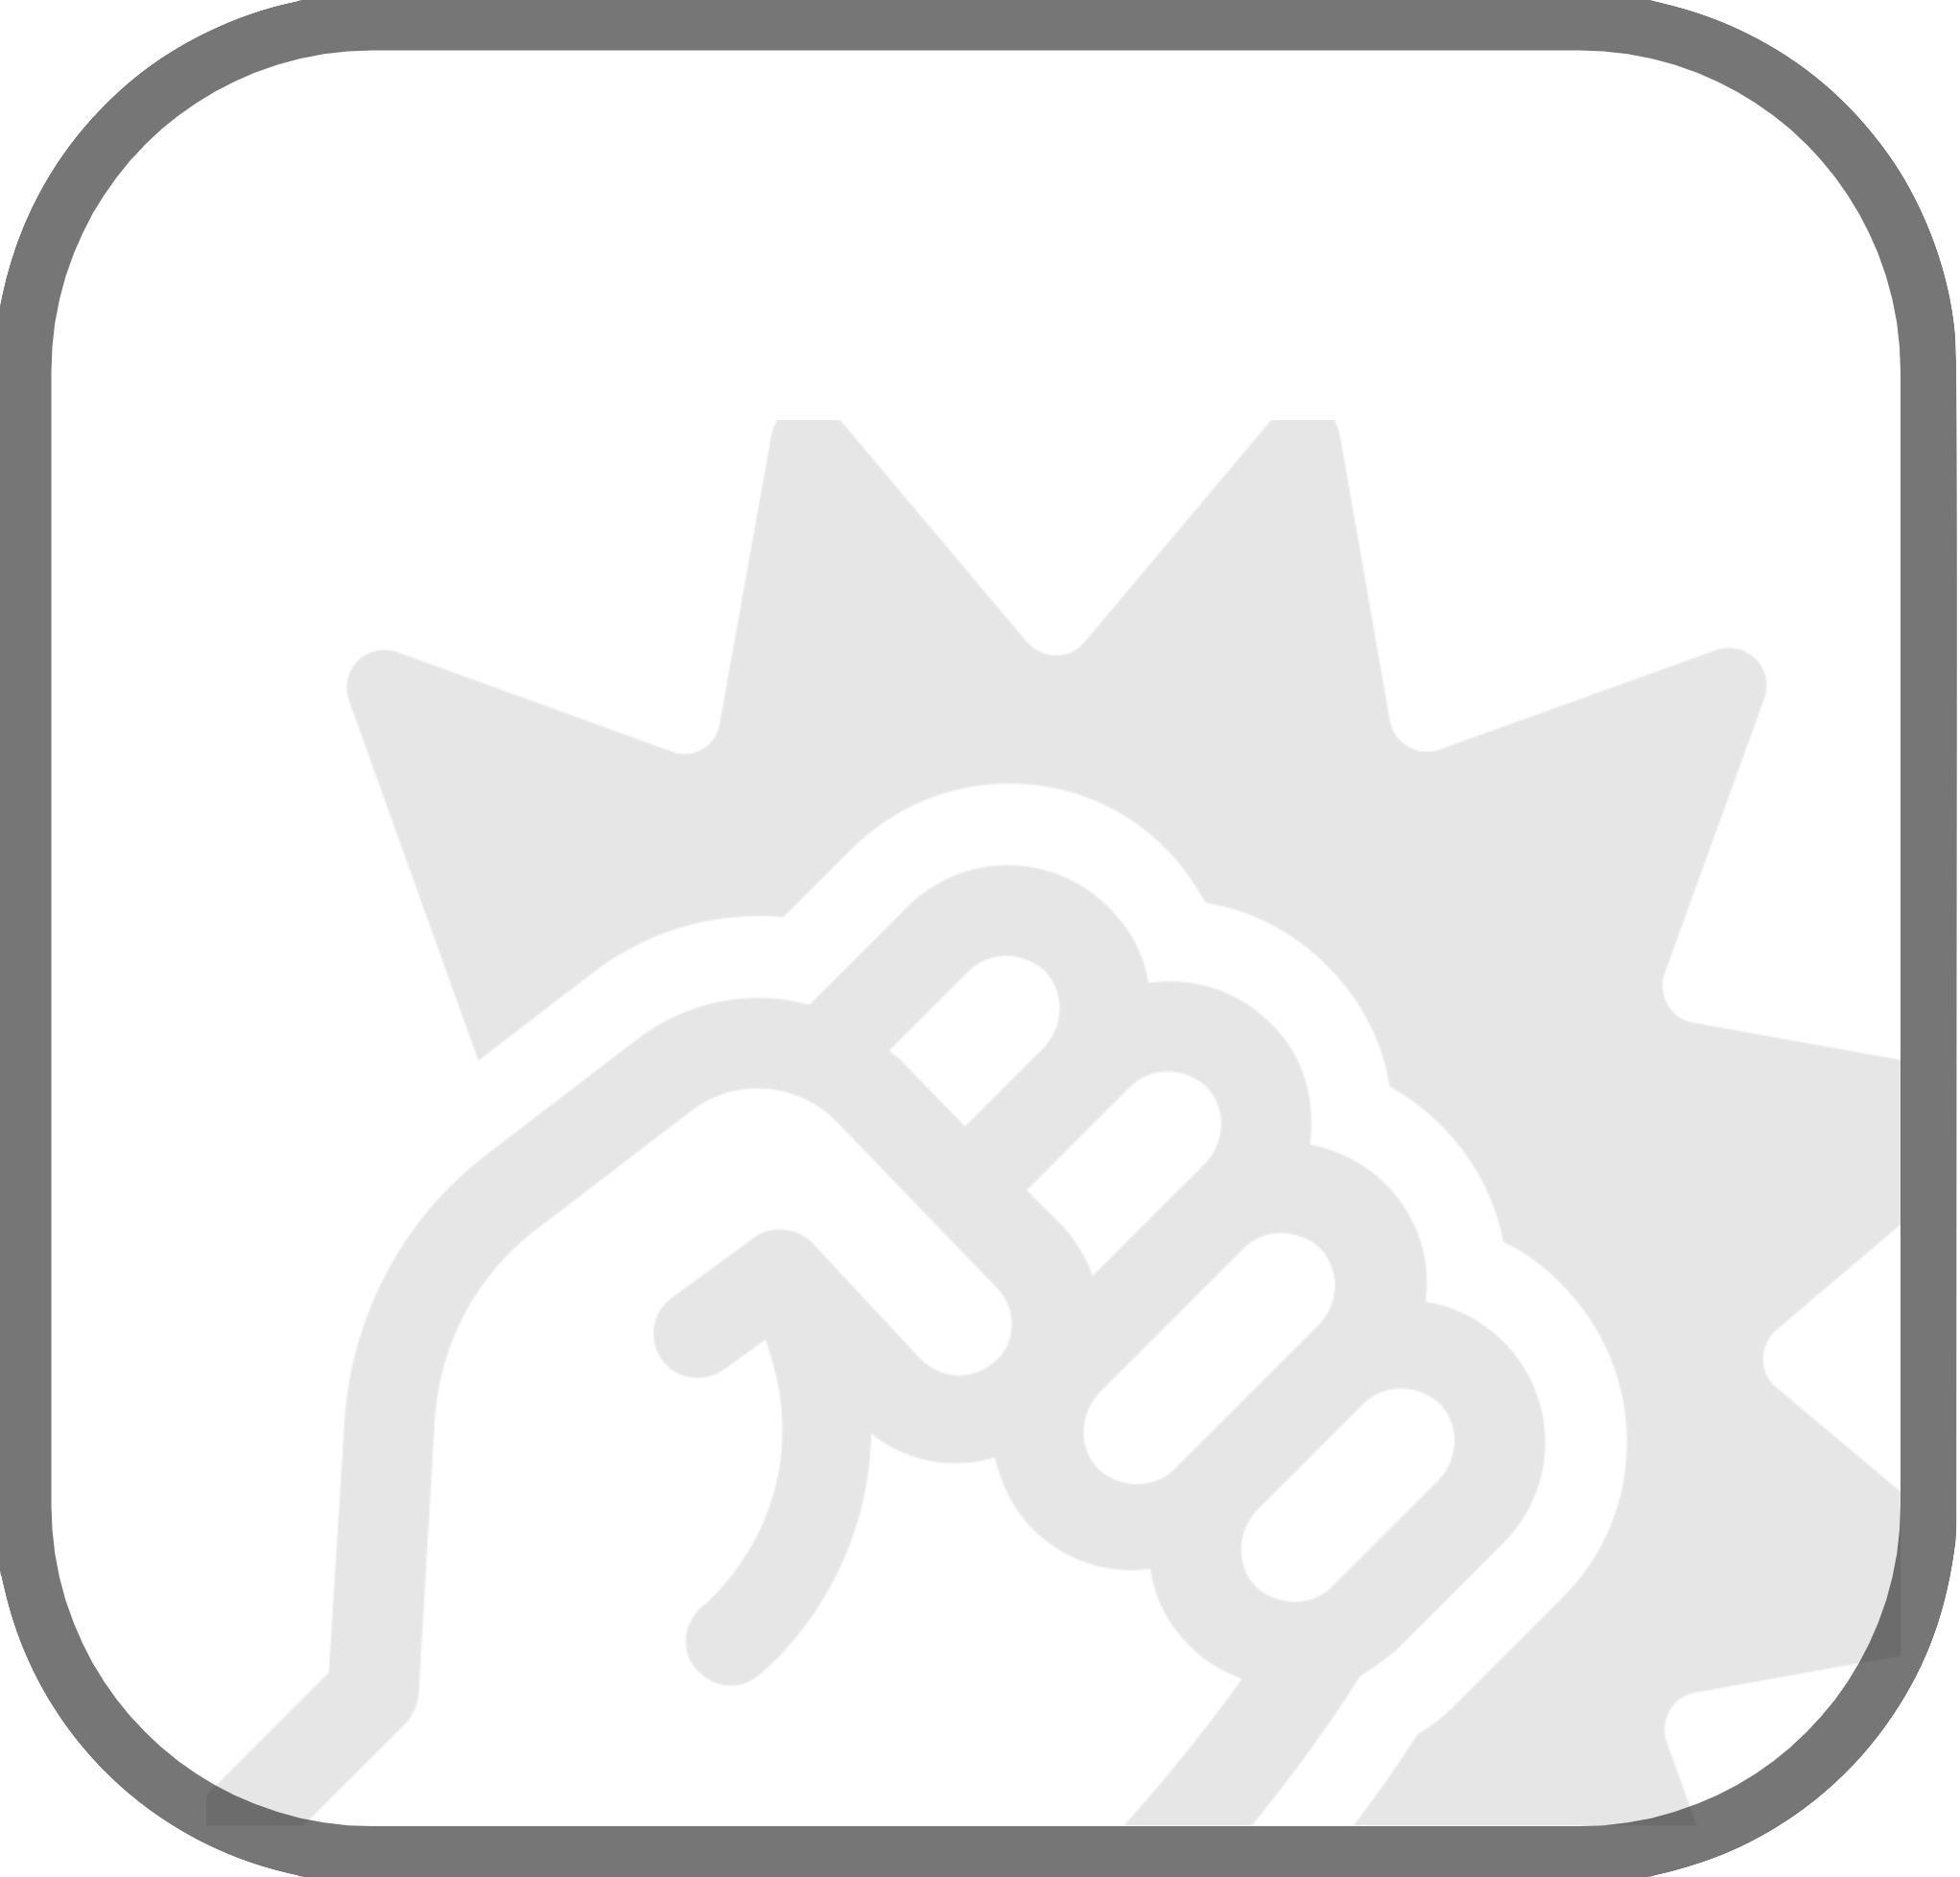 violence icon for screen it first